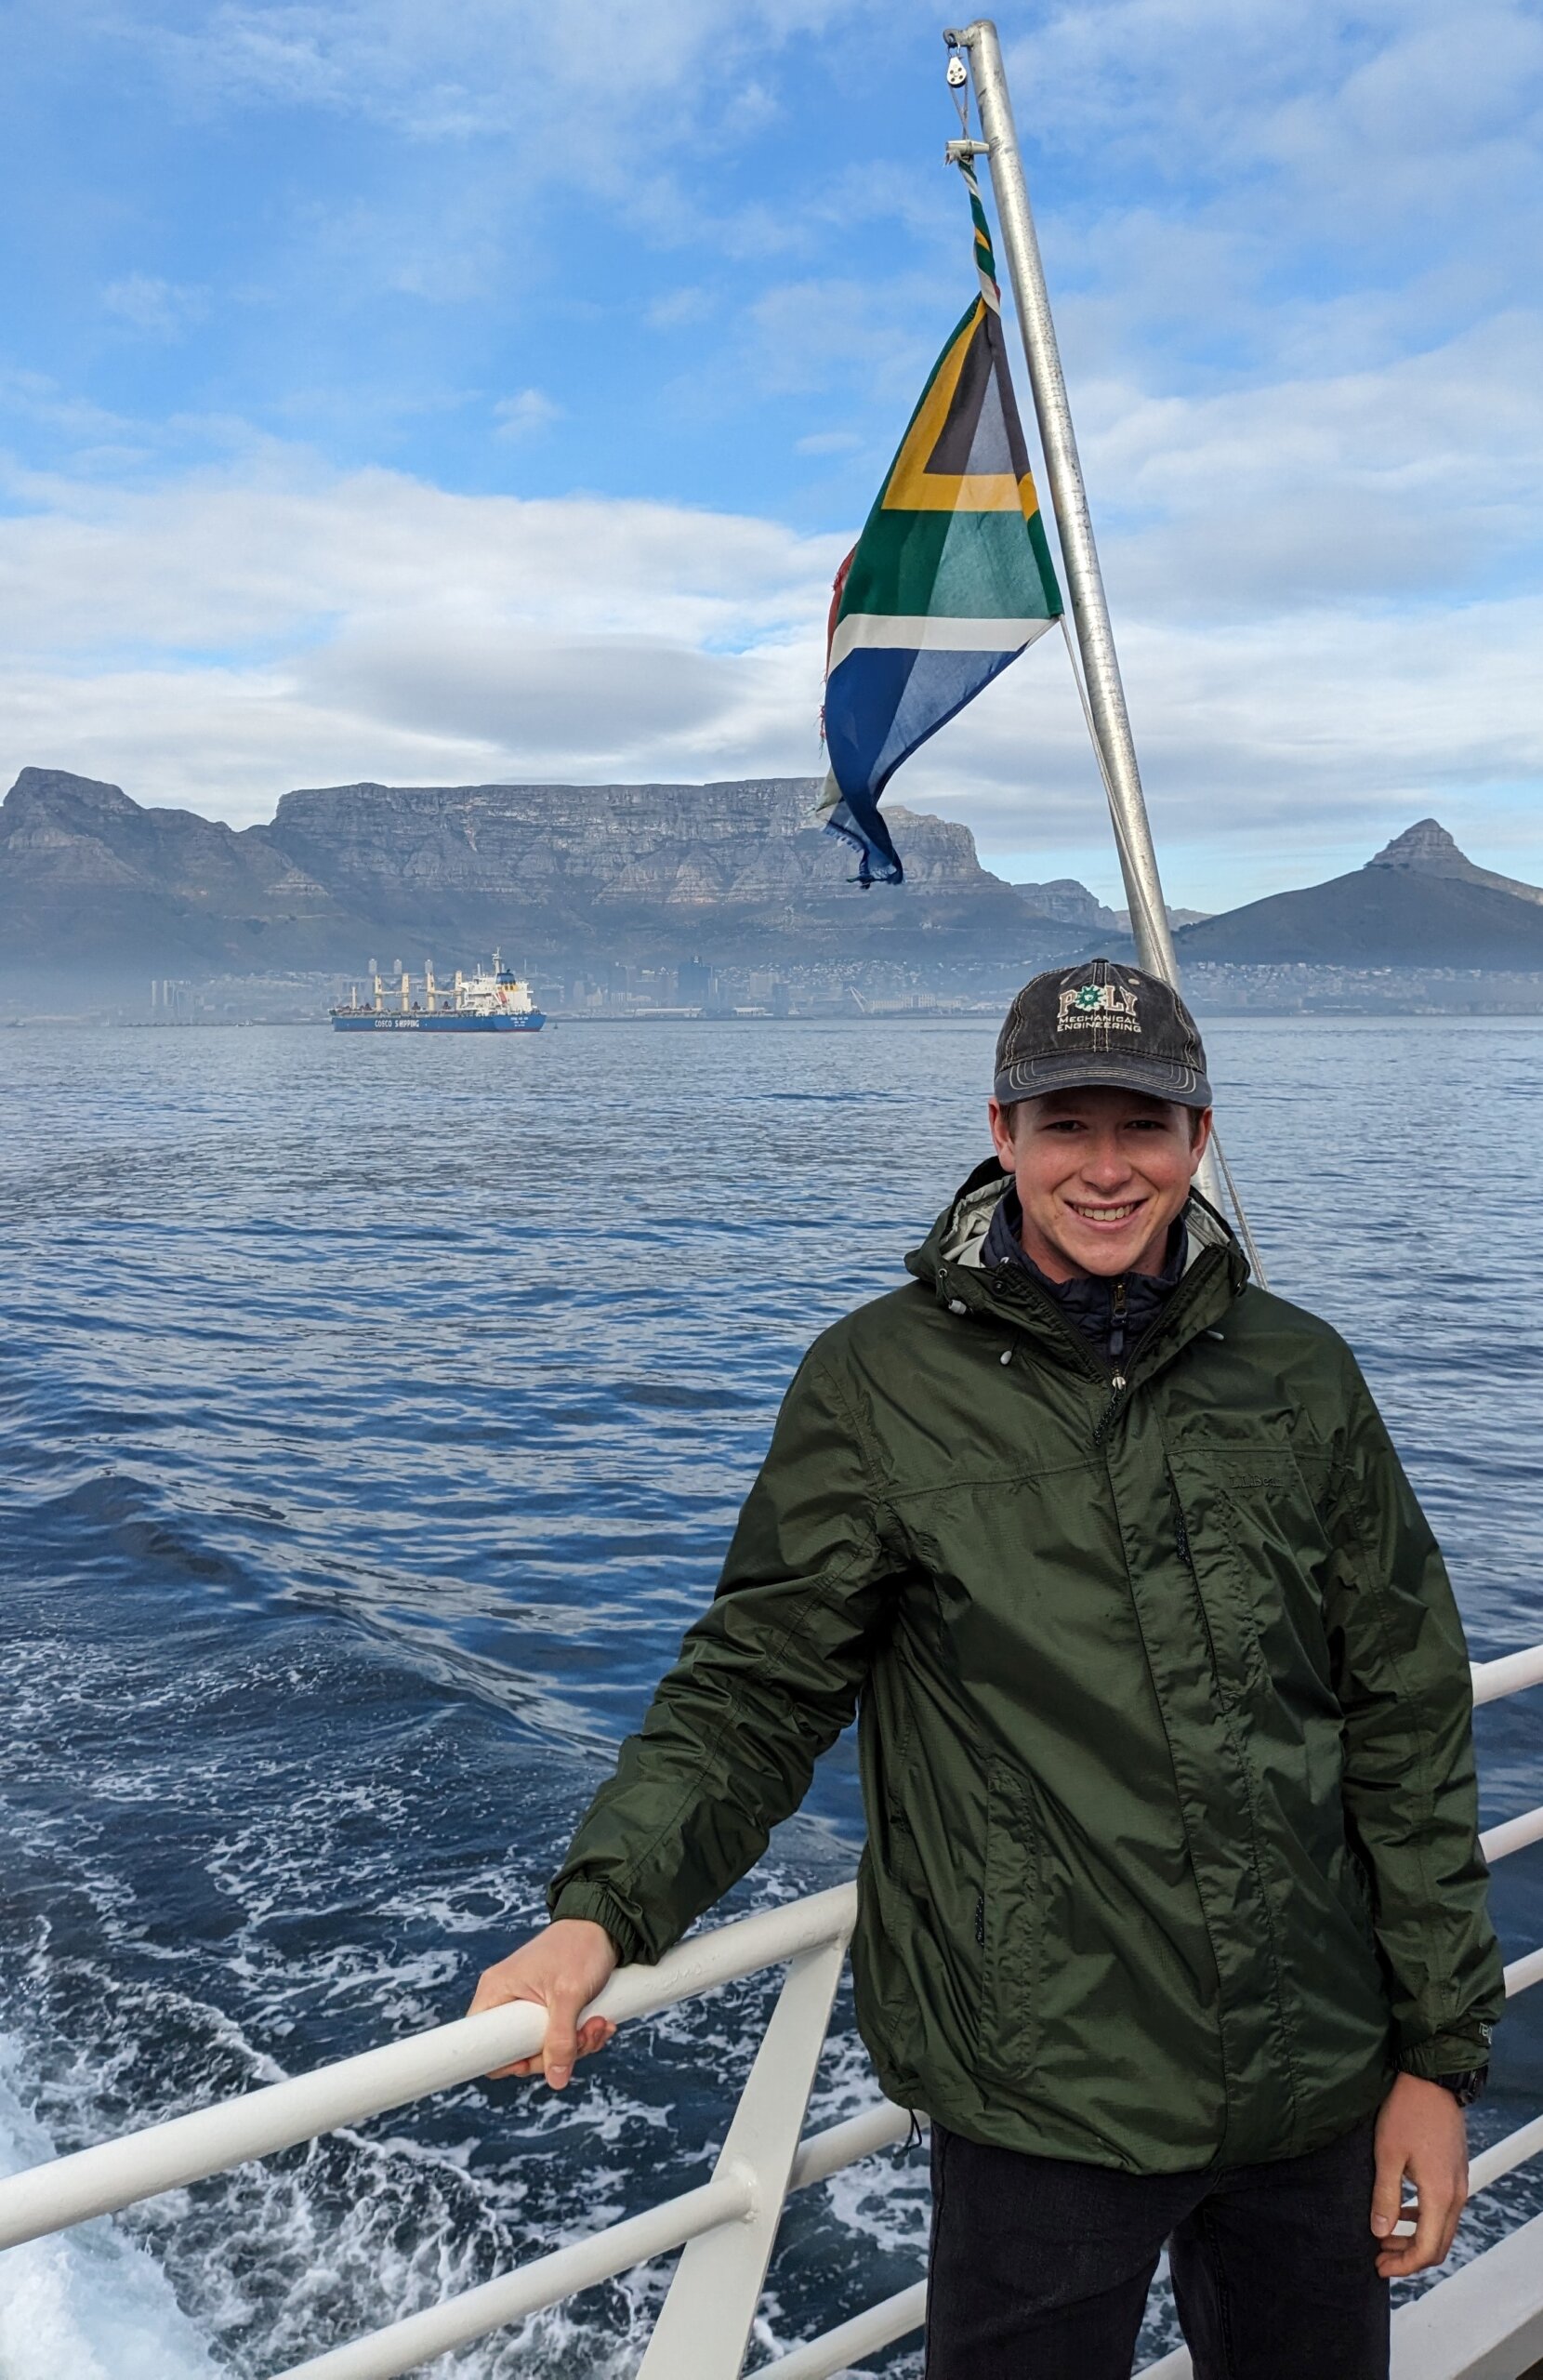 Cal Poly student takes boat ride in South Africa with Table Mountain in the background